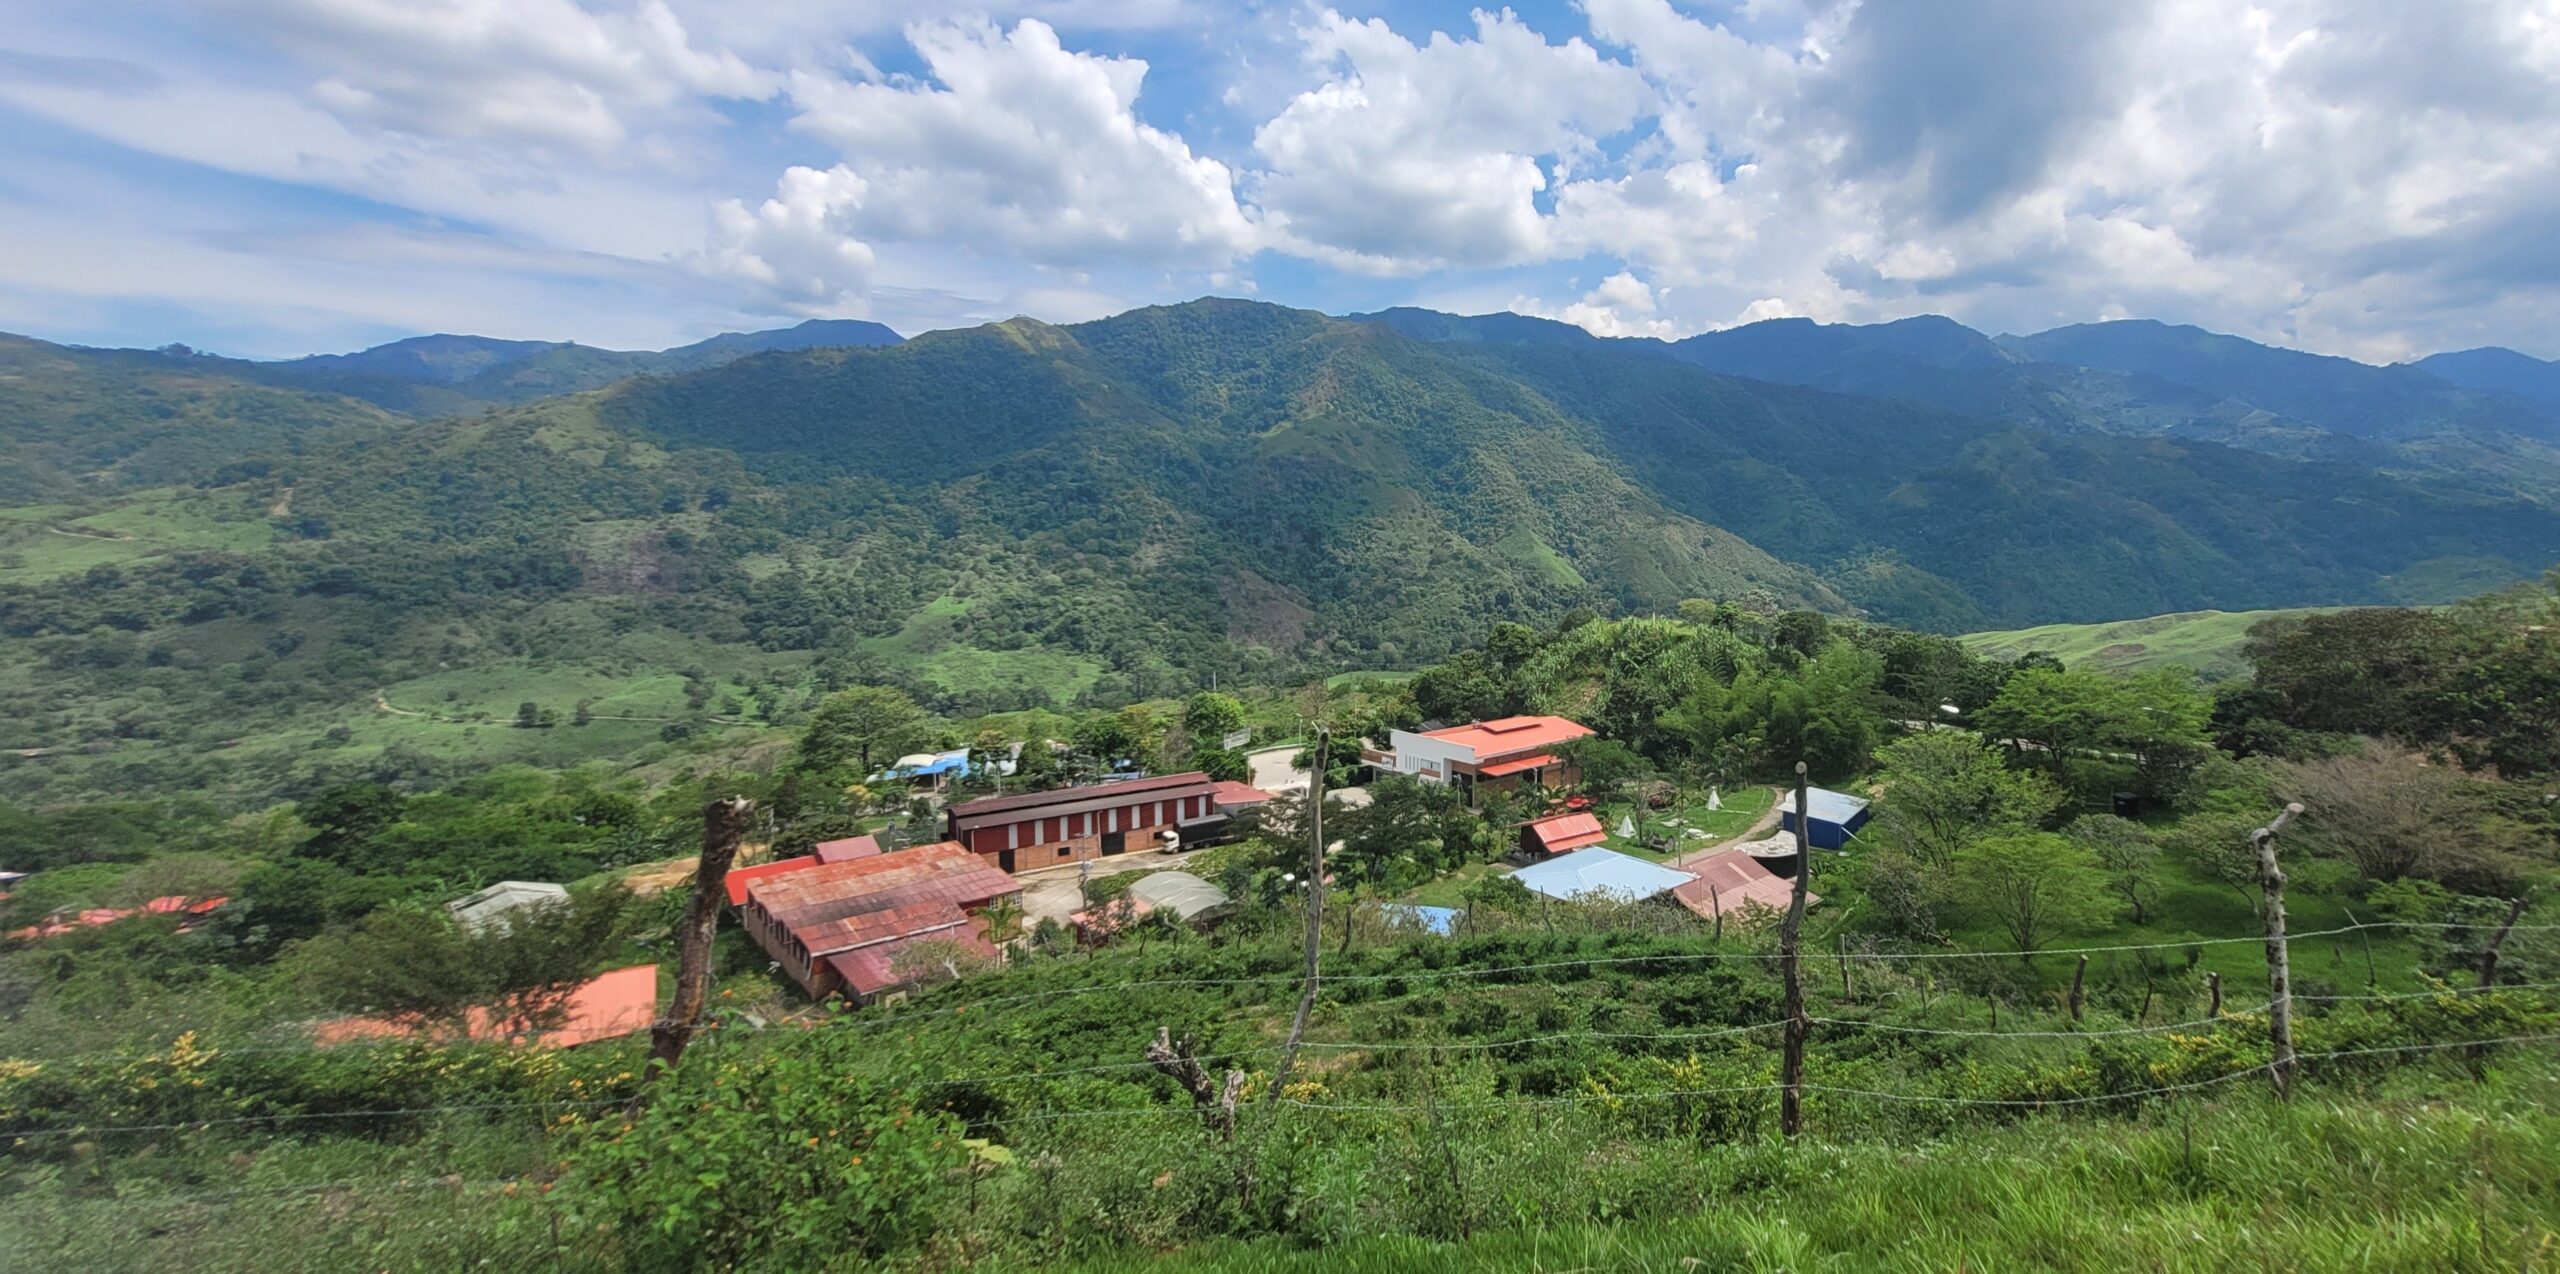 ASOPEP facilities dot the landscape in the town of Planadas located southwest of the city of Cali, Colombia. Credit: Root Capital.